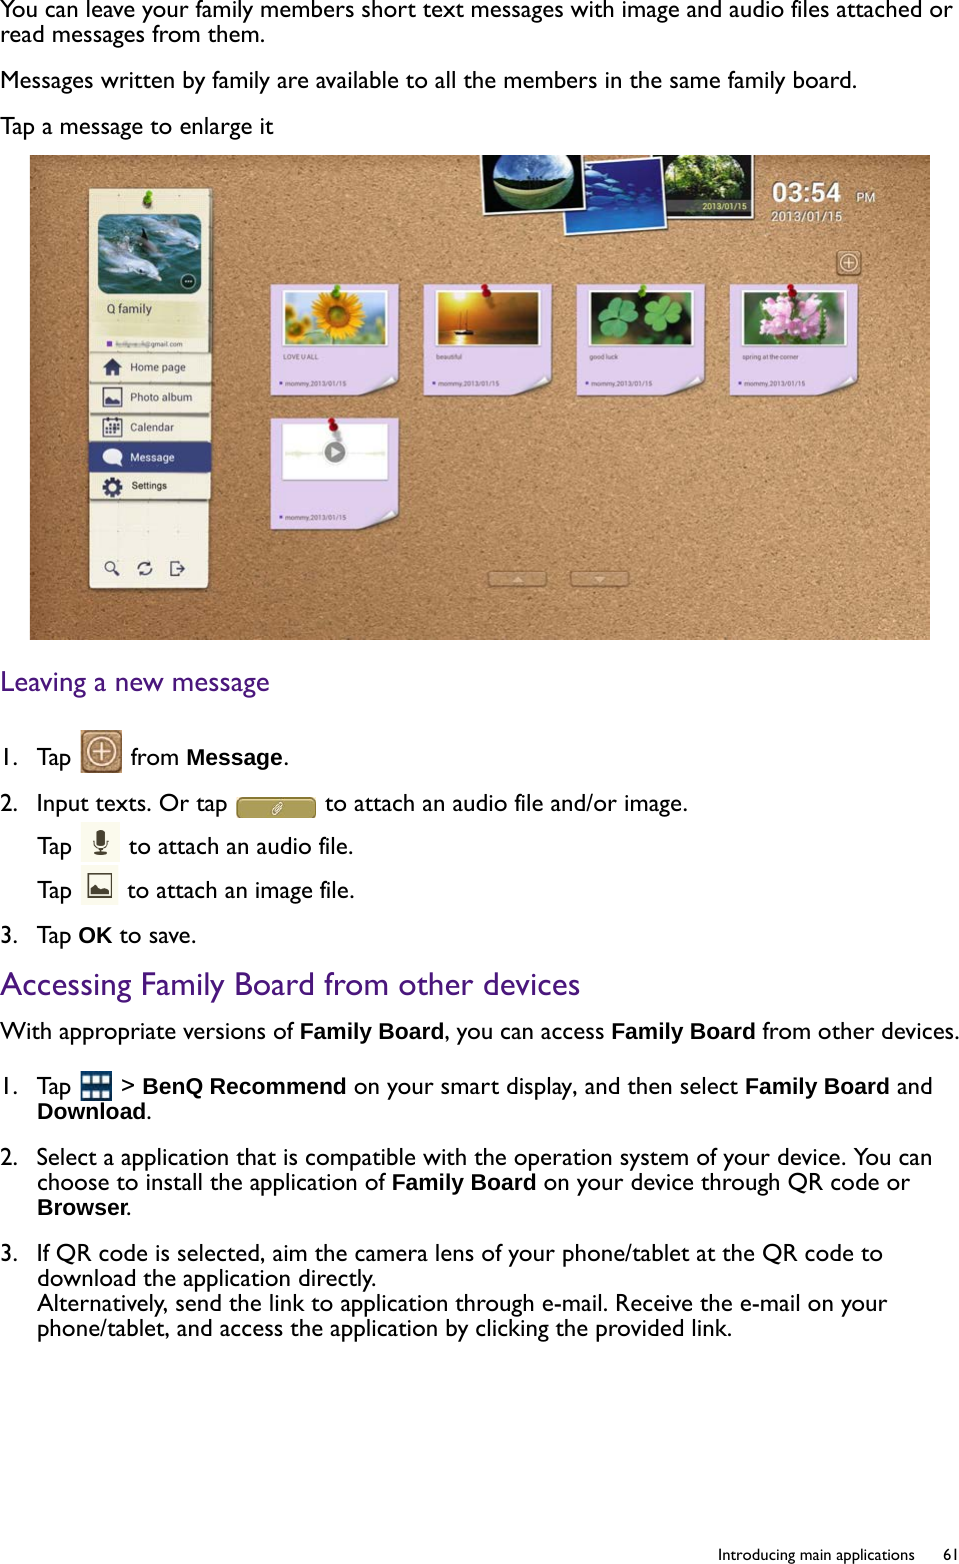   61  Introducing main applicationsYou can leave your family members short text messages with image and audio files attached or read messages from them.Messages written by family are available to all the members in the same family board.Tap a message to enlarge itLeaving a new message1.  Tap   from Message.2.  Input texts. Or tap   to attach an audio file and/or image.Tap   to attach an audio file.Tap   to attach an image file.3.  Tap OK to save.Accessing Family Board from other devicesWith appropriate versions of Family Board, you can access Family Board from other devices.1.  Tap   &gt; BenQ Recommend on your smart display, and then select Family Board and Download.2.  Select a application that is compatible with the operation system of your device. You can choose to install the application of Family Board on your device through QR code or Browser.3.  If QR code is selected, aim the camera lens of your phone/tablet at the QR code to download the application directly.Alternatively, send the link to application through e-mail. Receive the e-mail on your phone/tablet, and access the application by clicking the provided link.